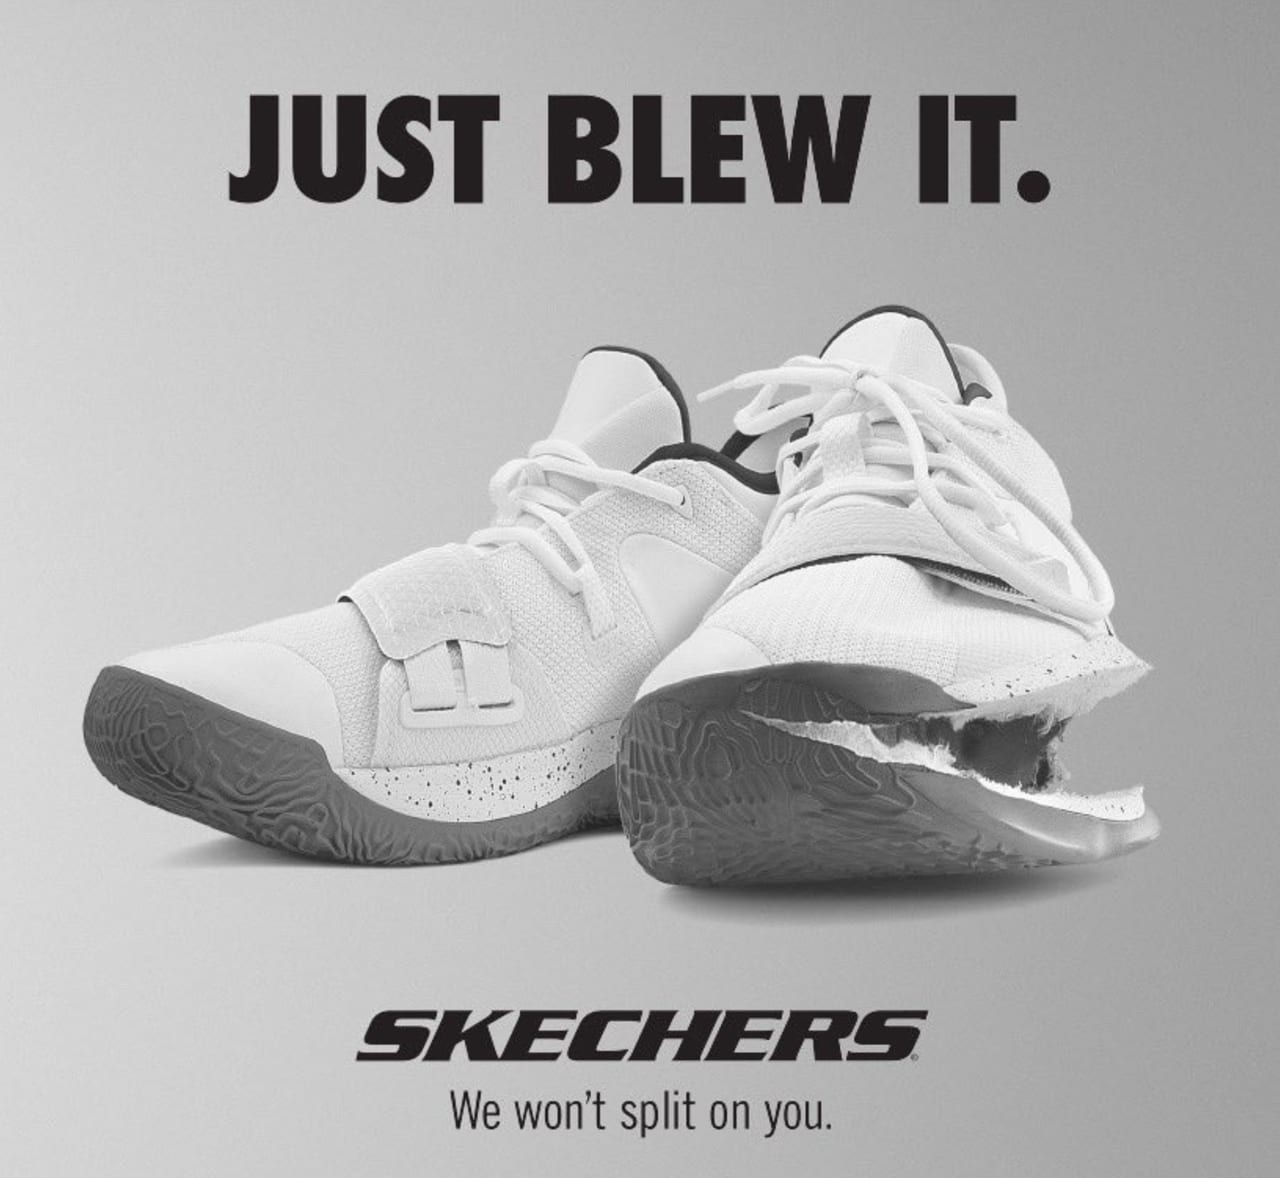 Skechers Takes Shot at Nike and Zion 